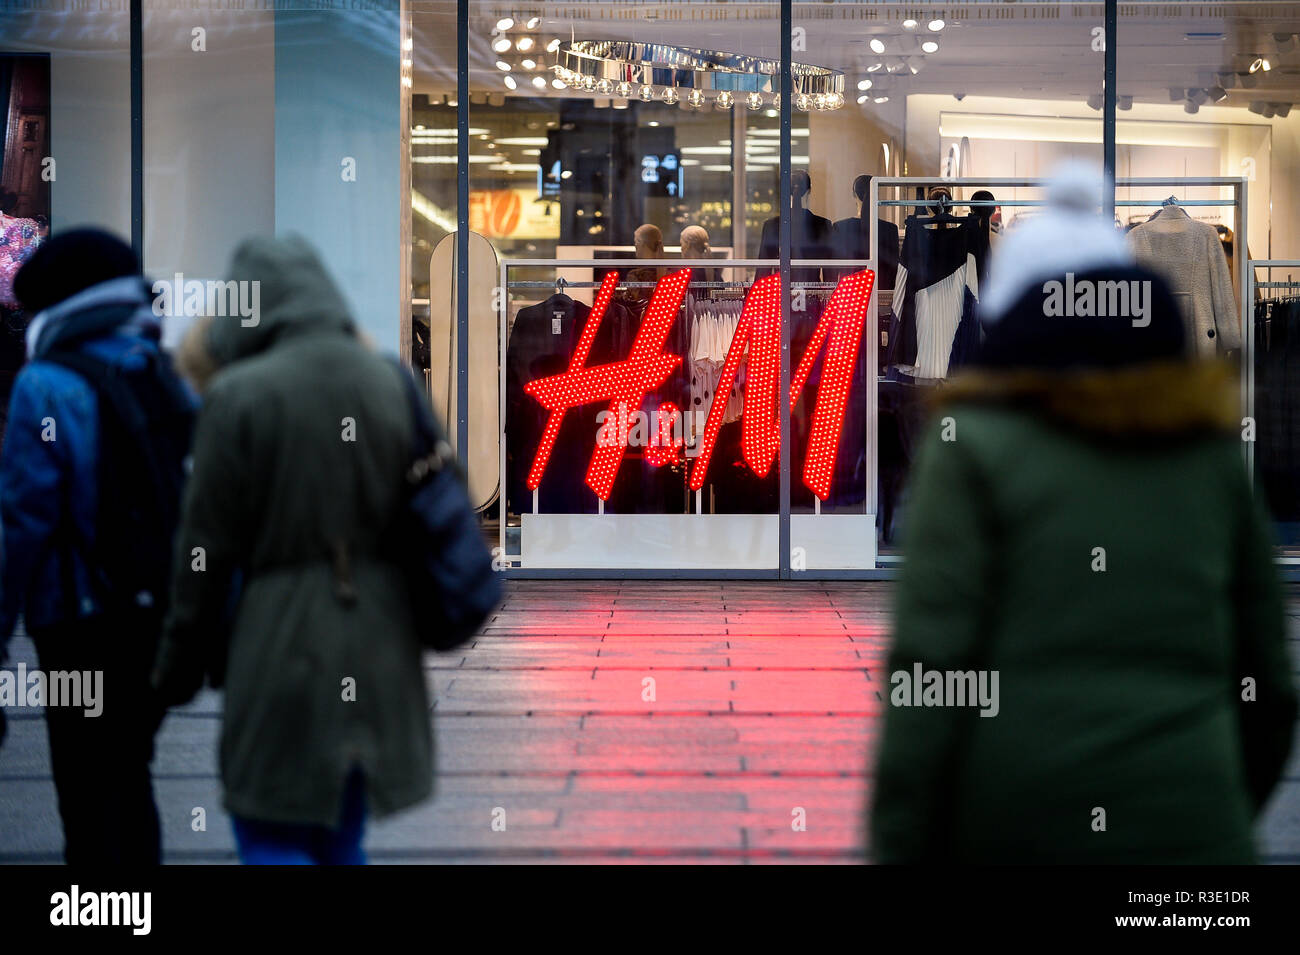 People seen walking by a H&M sign ahead of the Black Friday Stock Photo -  Alamy